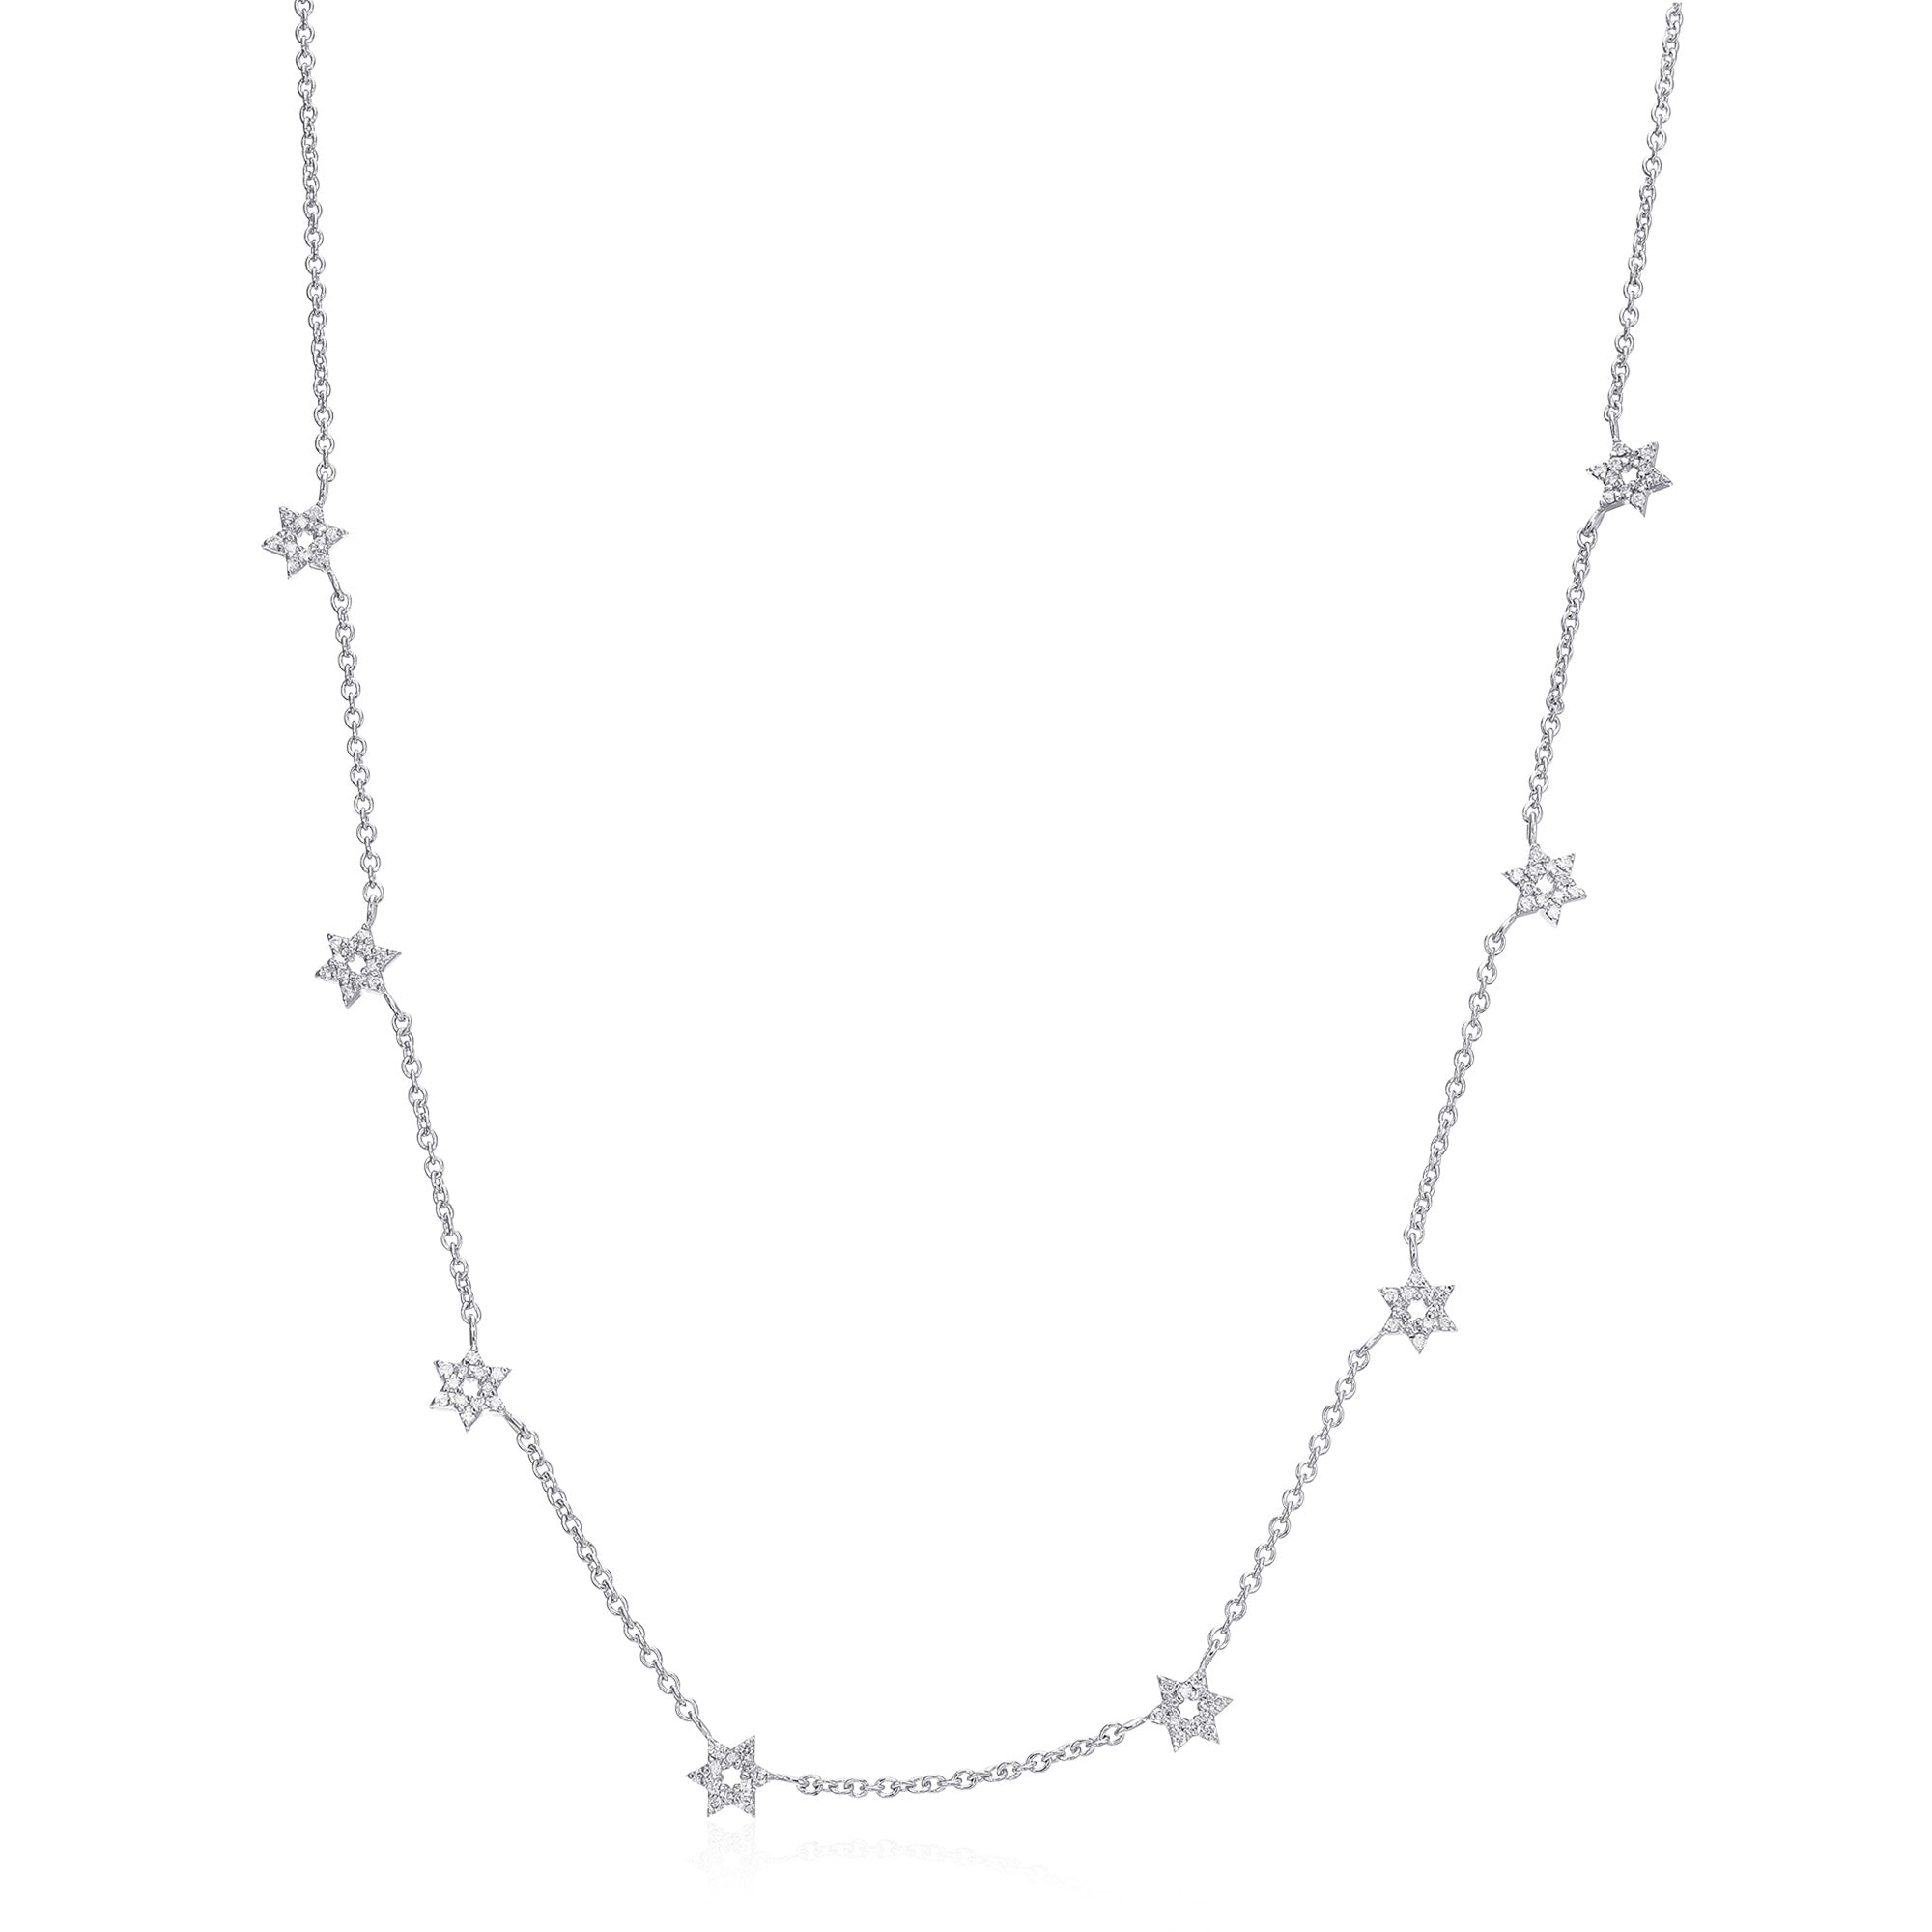 RISING STAR NECKLACE